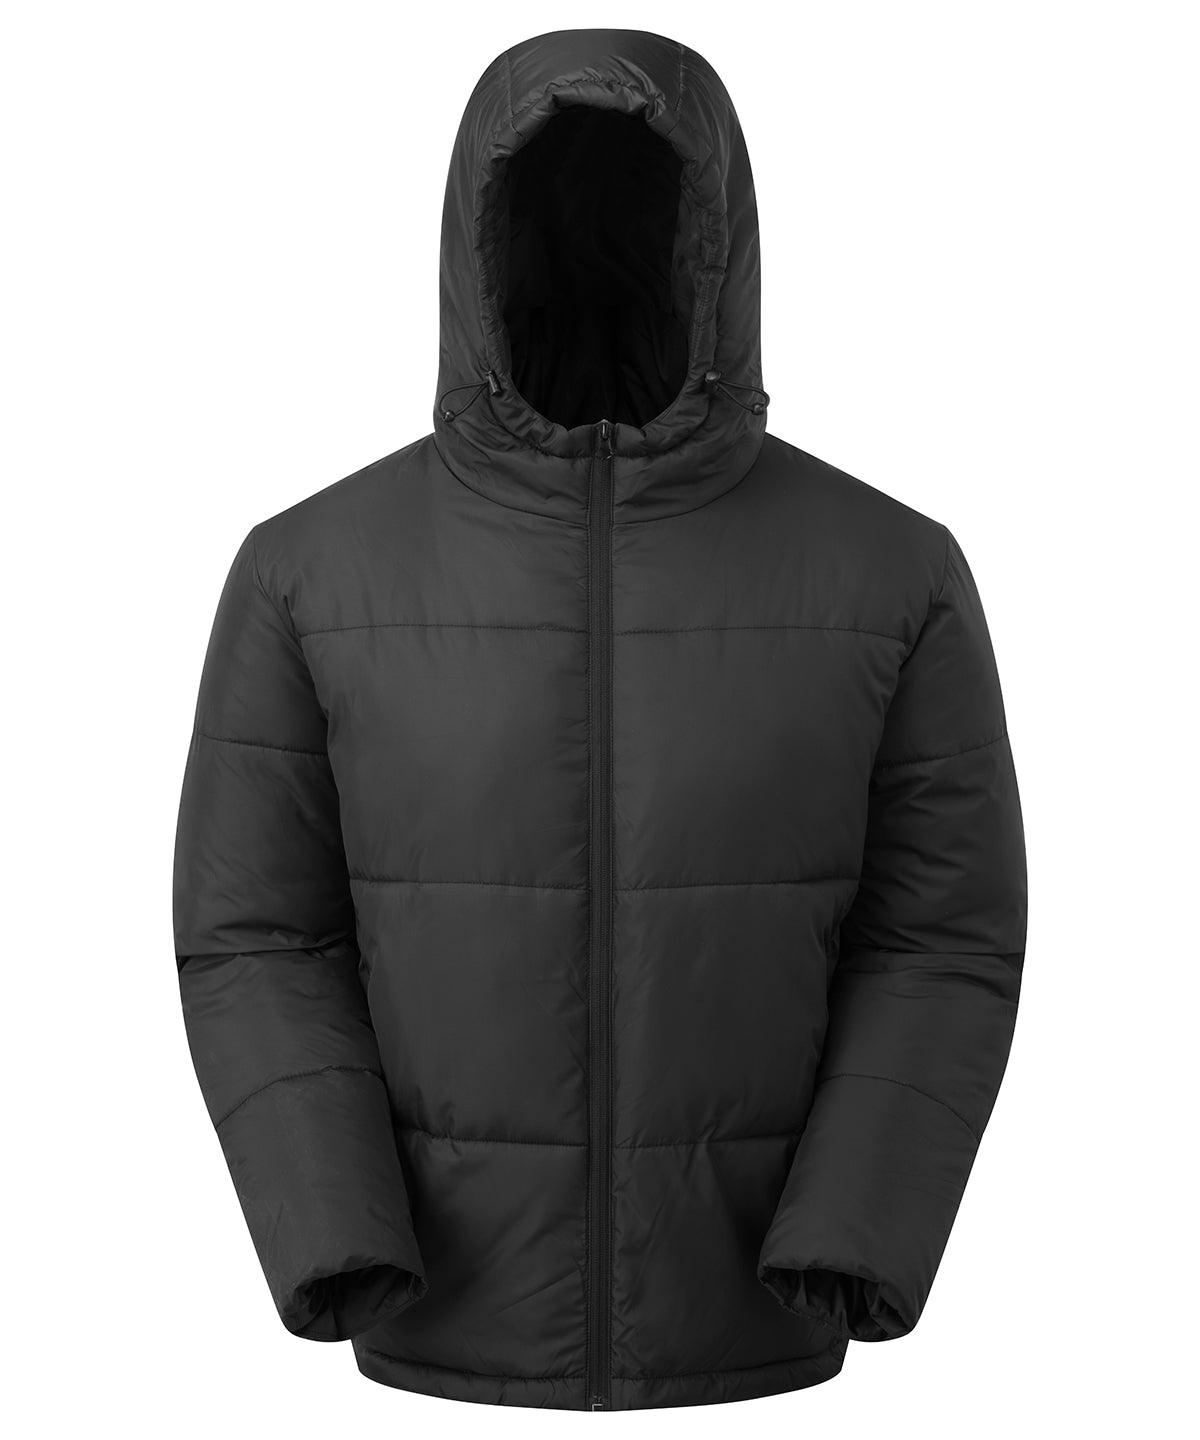 Black - Expanse padded jacket Jackets 2786 Jackets & Coats, New For 2021, New In Autumn Winter, New In Mid Year, Padded & Insulation, Padded Perfection Schoolwear Centres